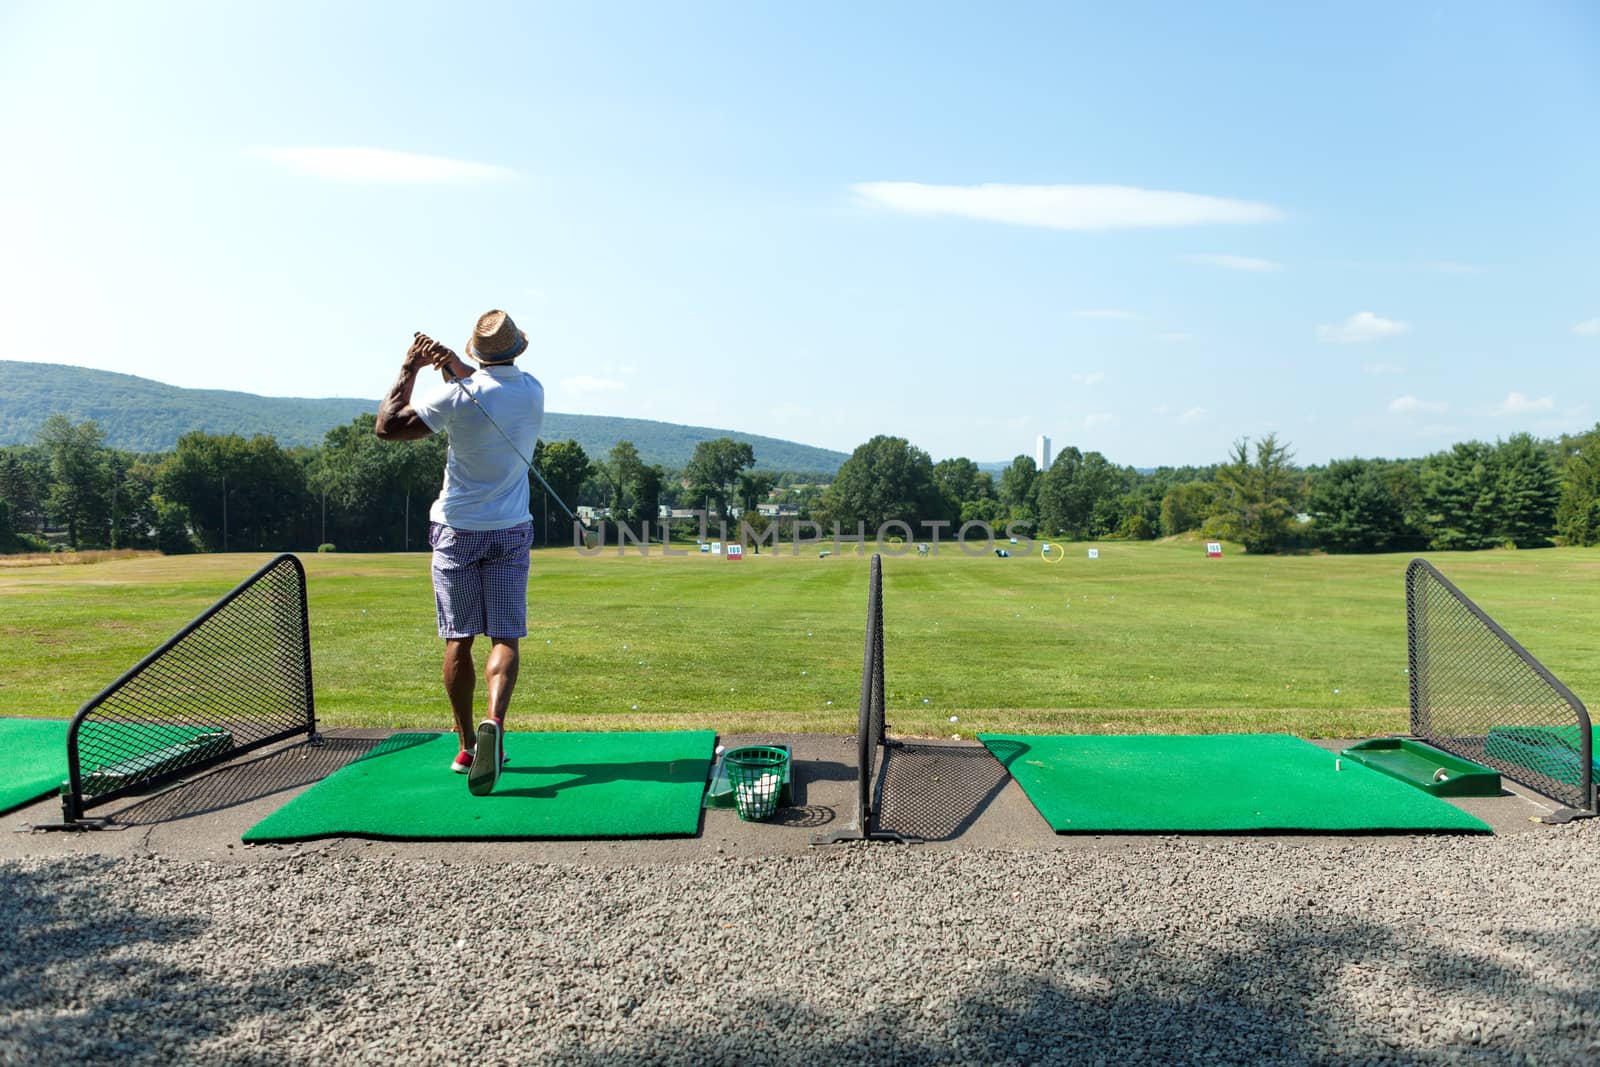 Driving Range Golf Swing by graficallyminded